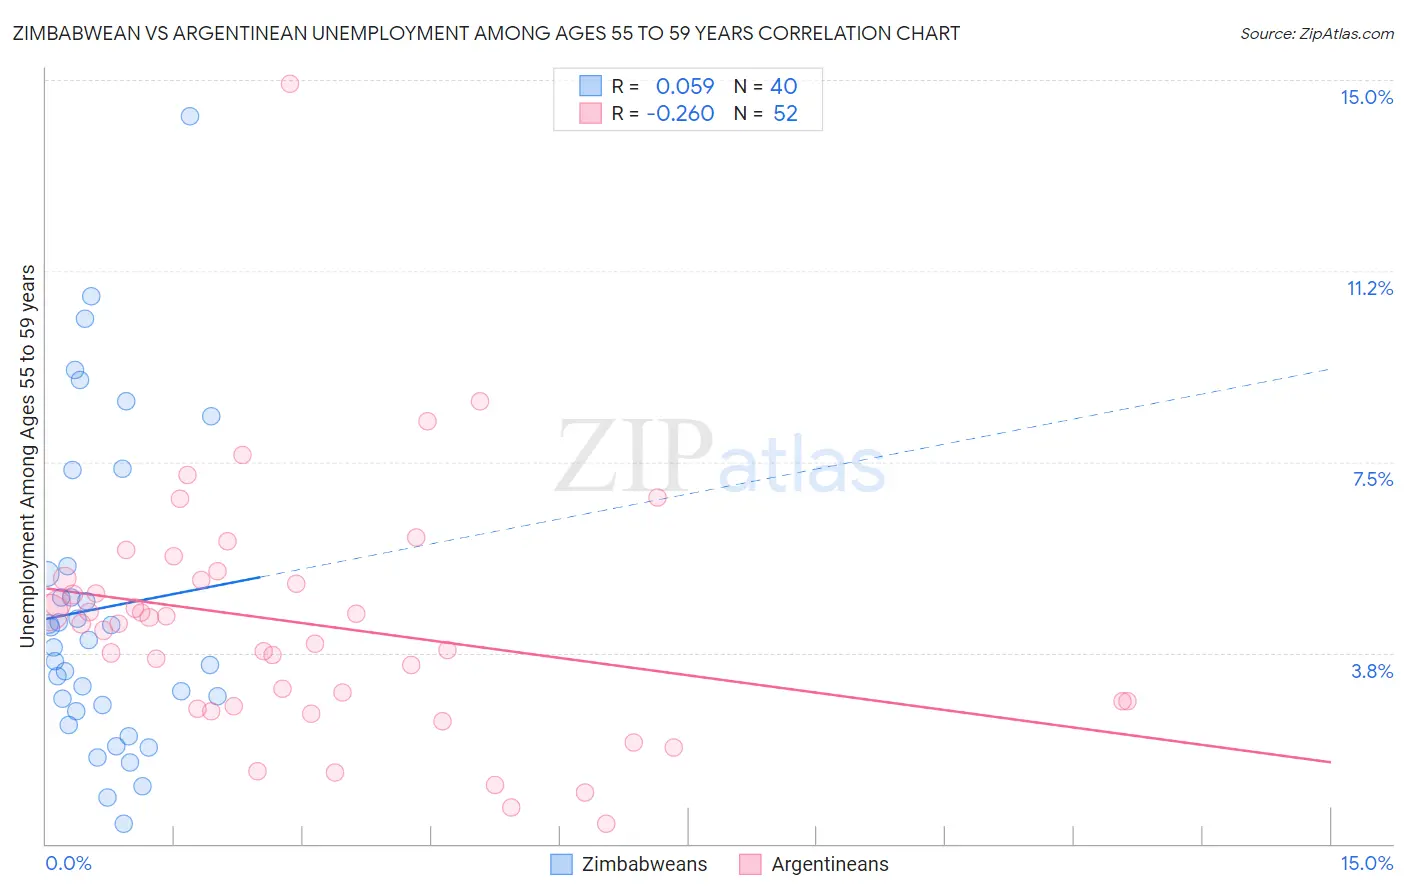 Zimbabwean vs Argentinean Unemployment Among Ages 55 to 59 years